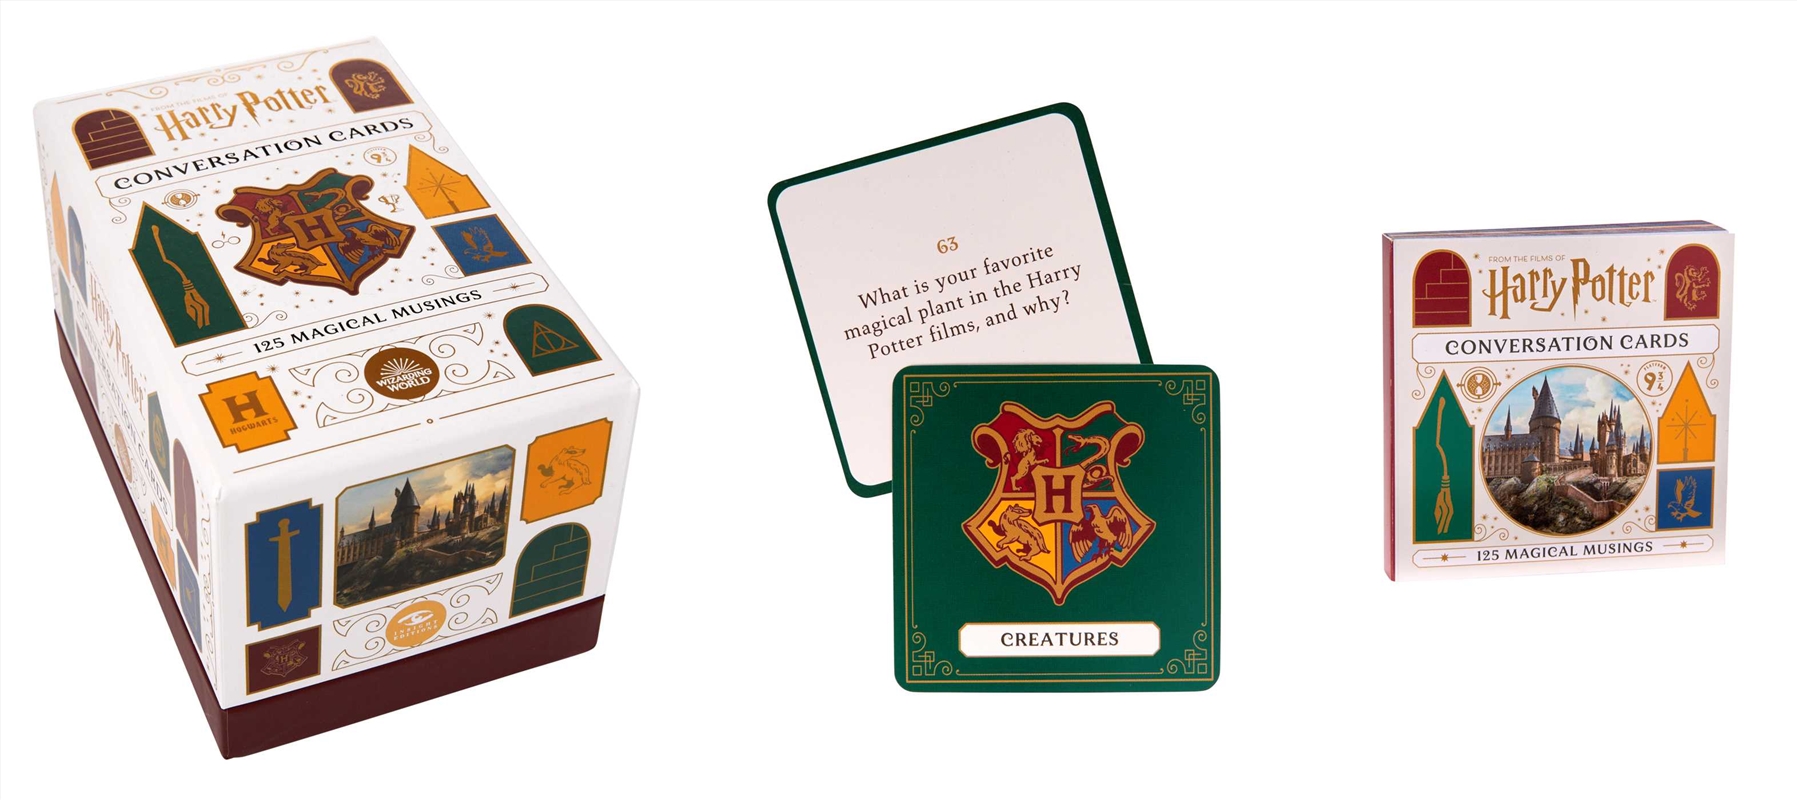 Harry Potter: Conversation Cards/Product Detail/Notebooks & Journals